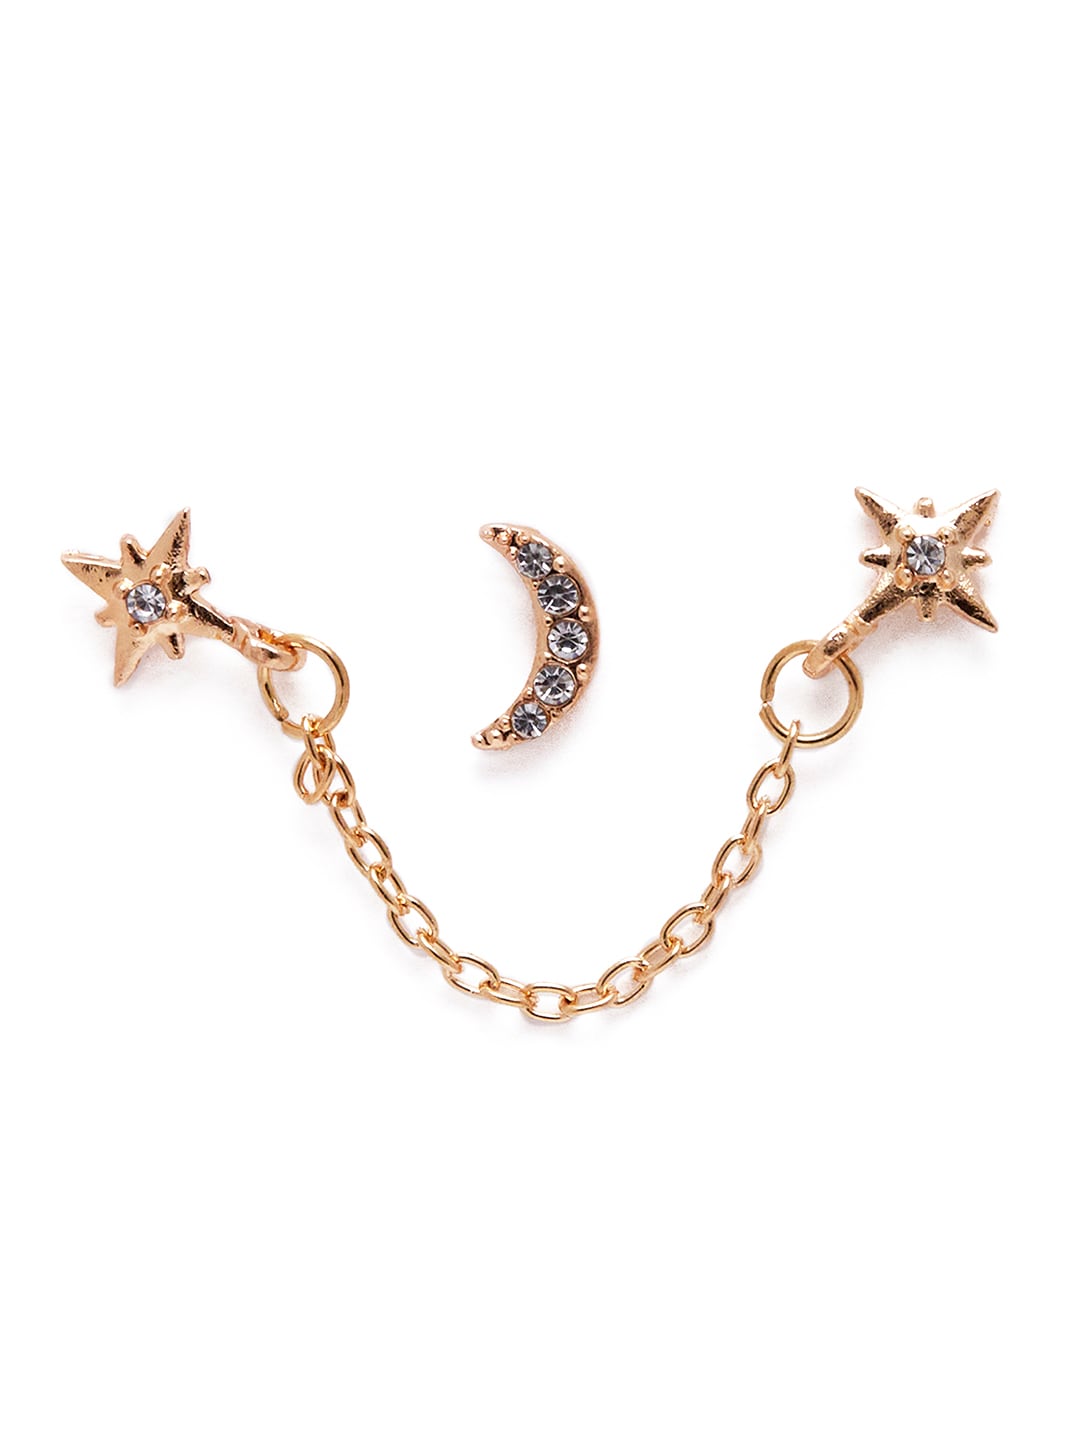 URBANIC Gold-Toned Crescent Shaped Studs Earrings Price in India